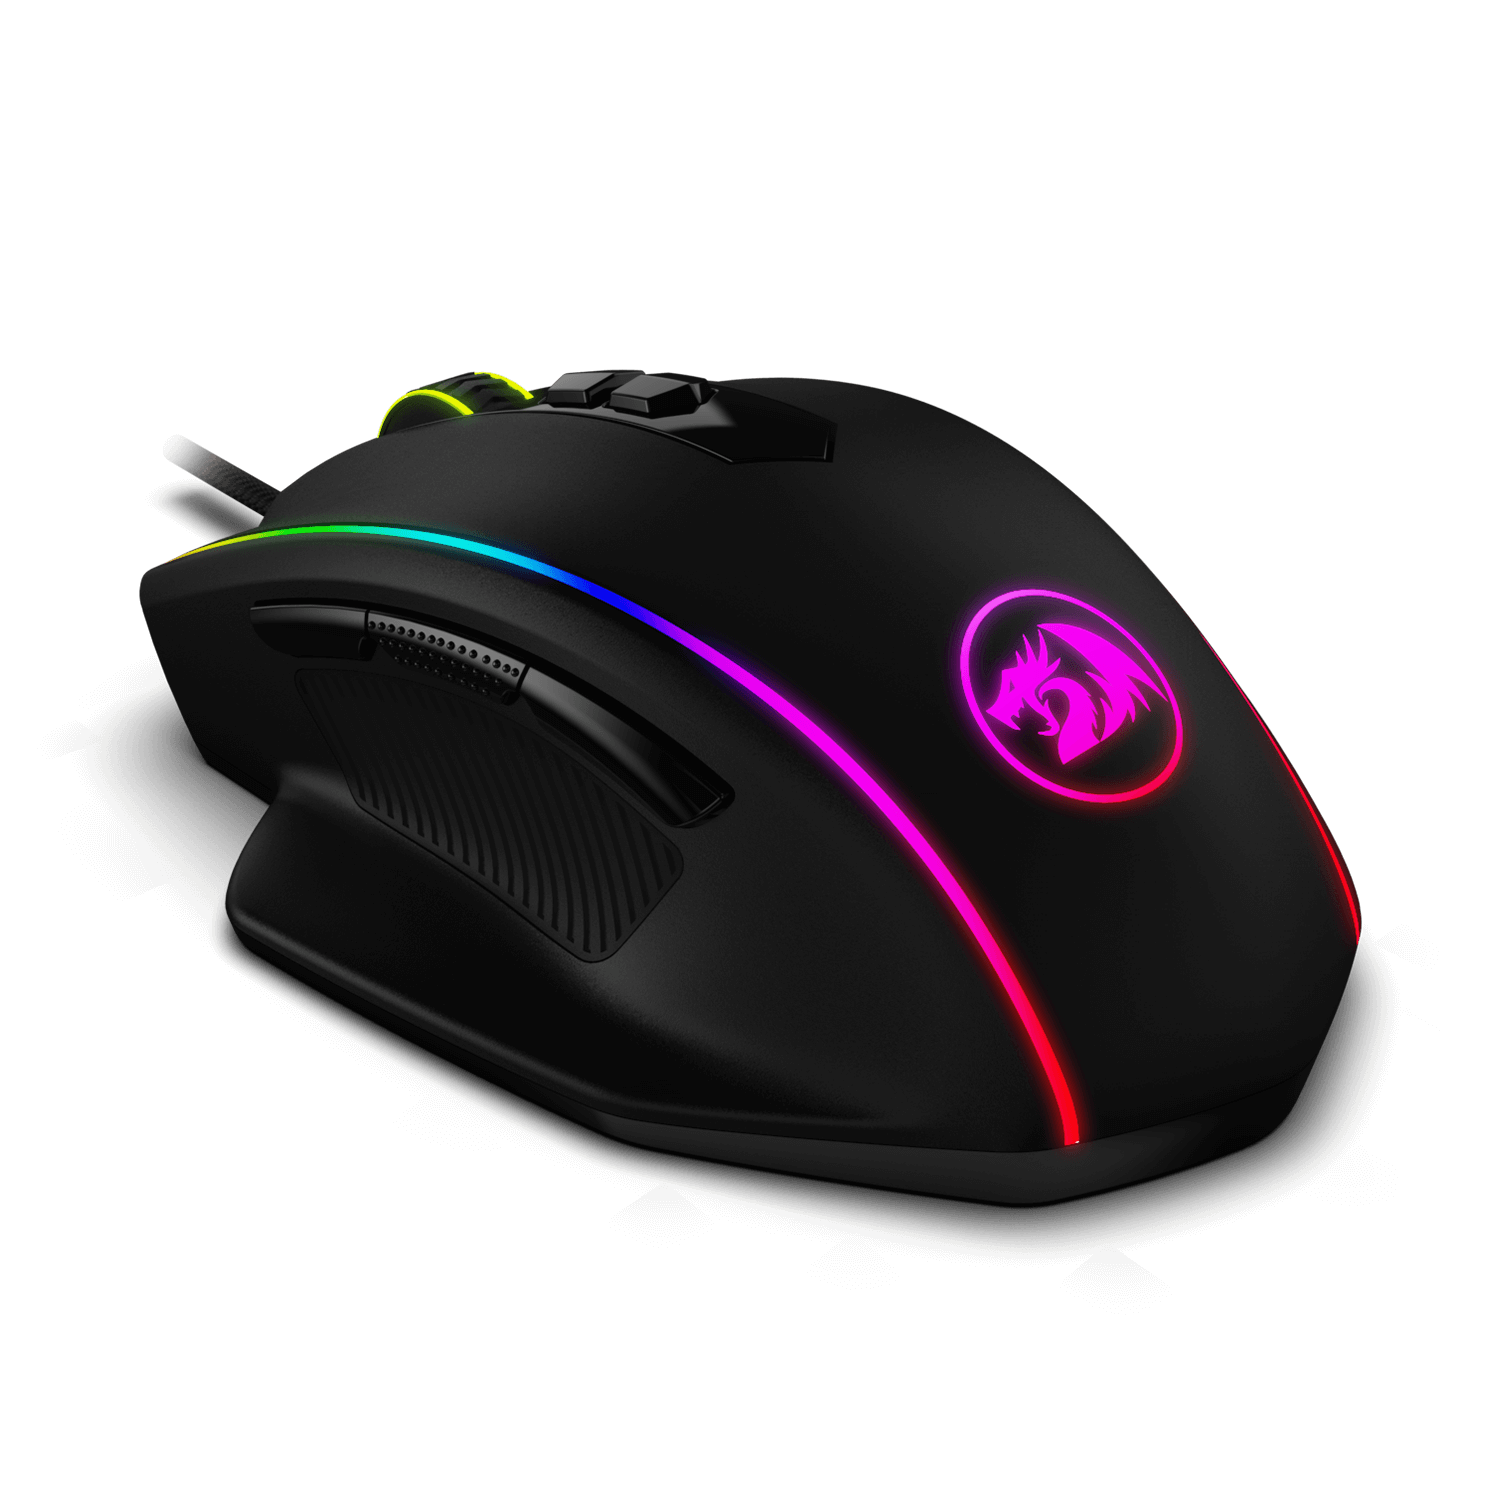 Redragon M720 VAMPIRE RGB Gaming Mouse with 5 DPI levels and 8 Macro Buttons